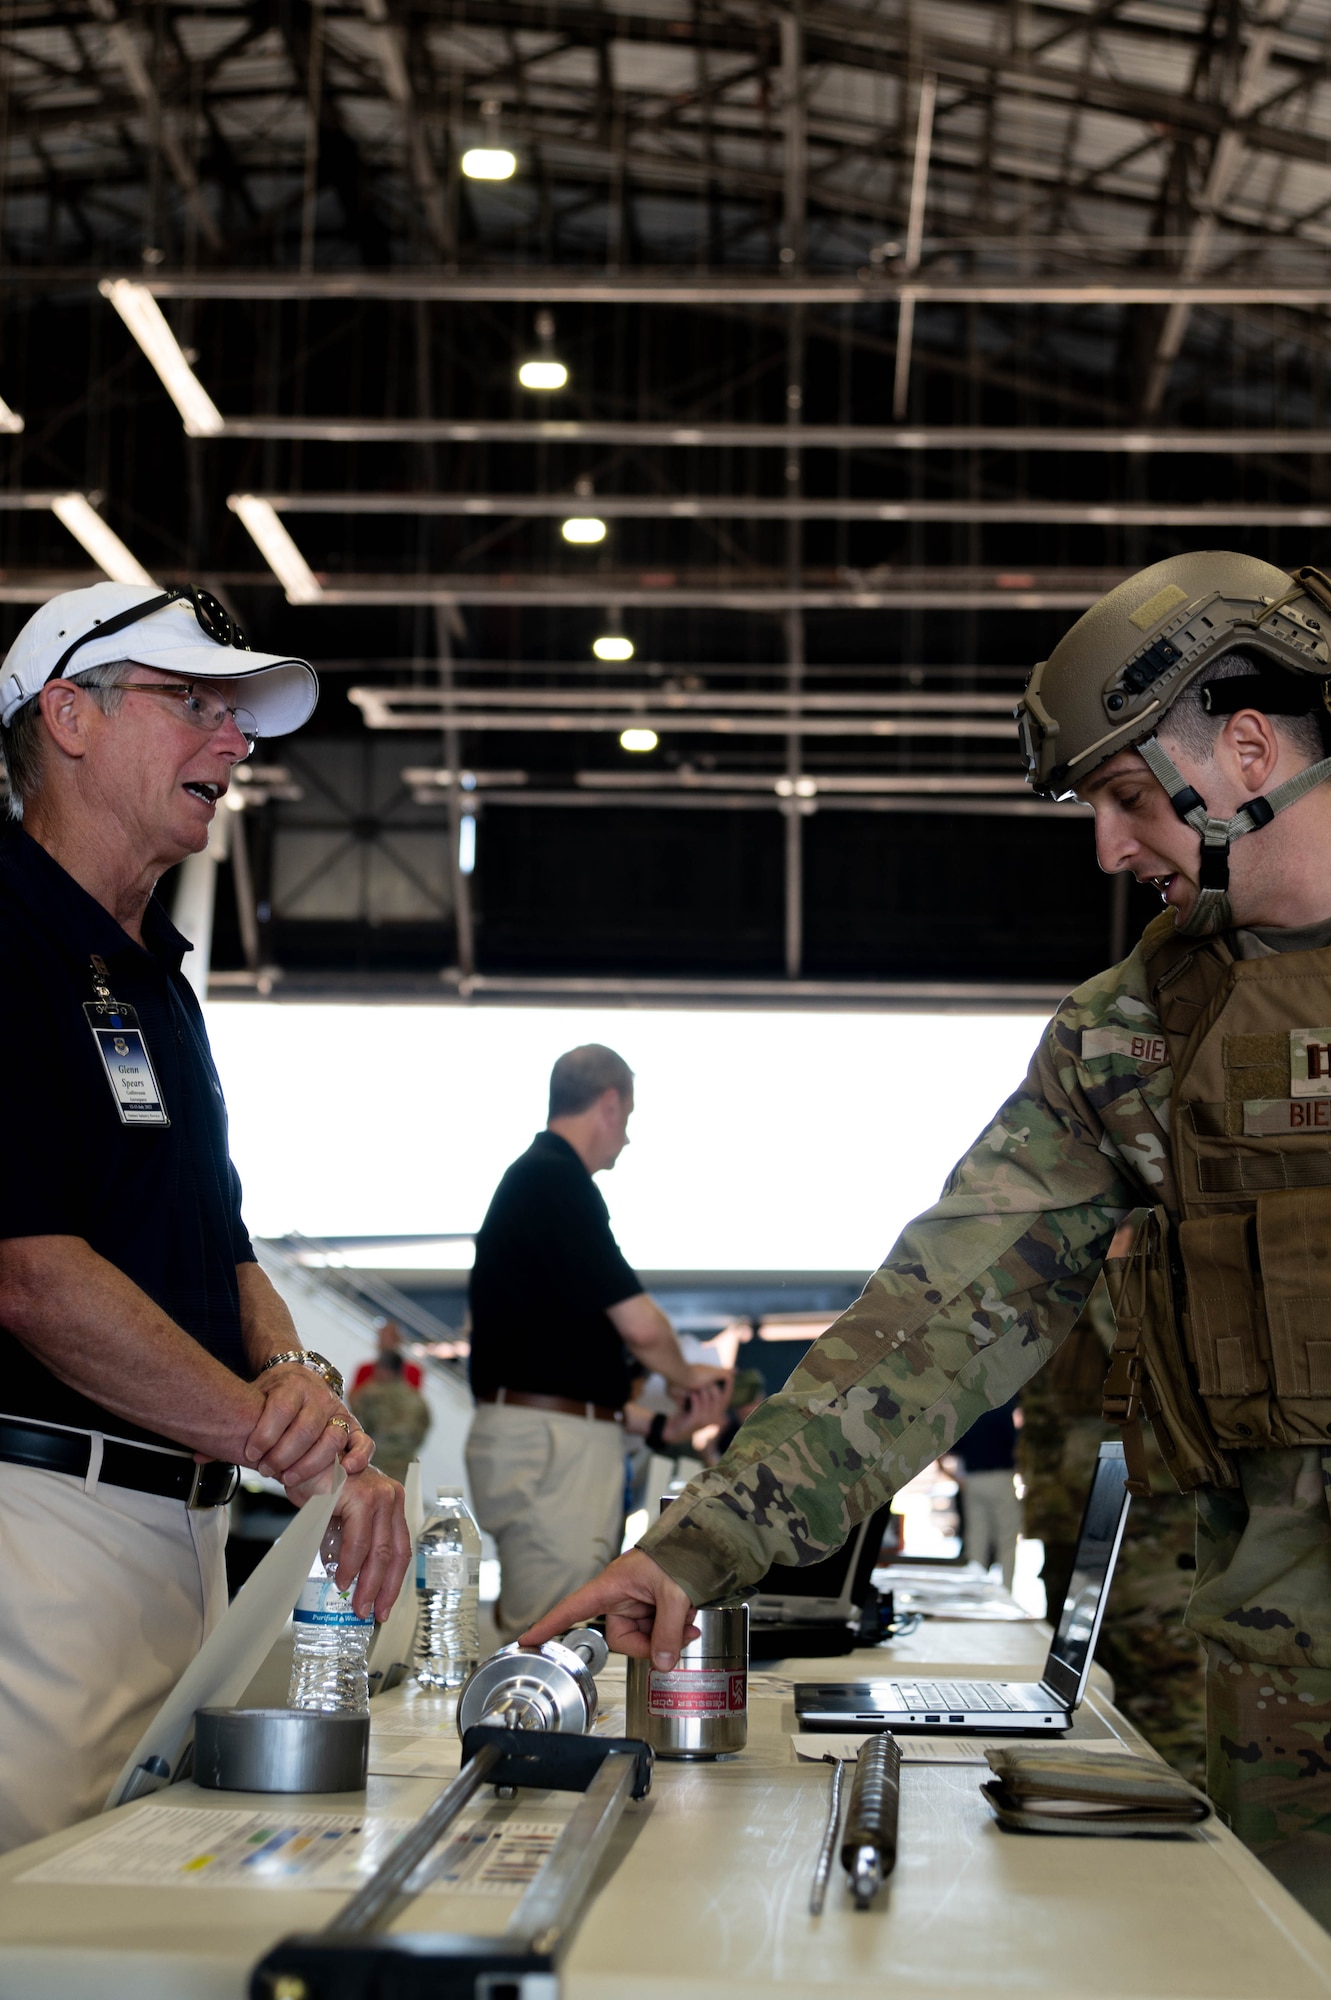 Civilian representative and service member observe display at an industry event on Scott Air Force Base Illinois, July 13, 2022.